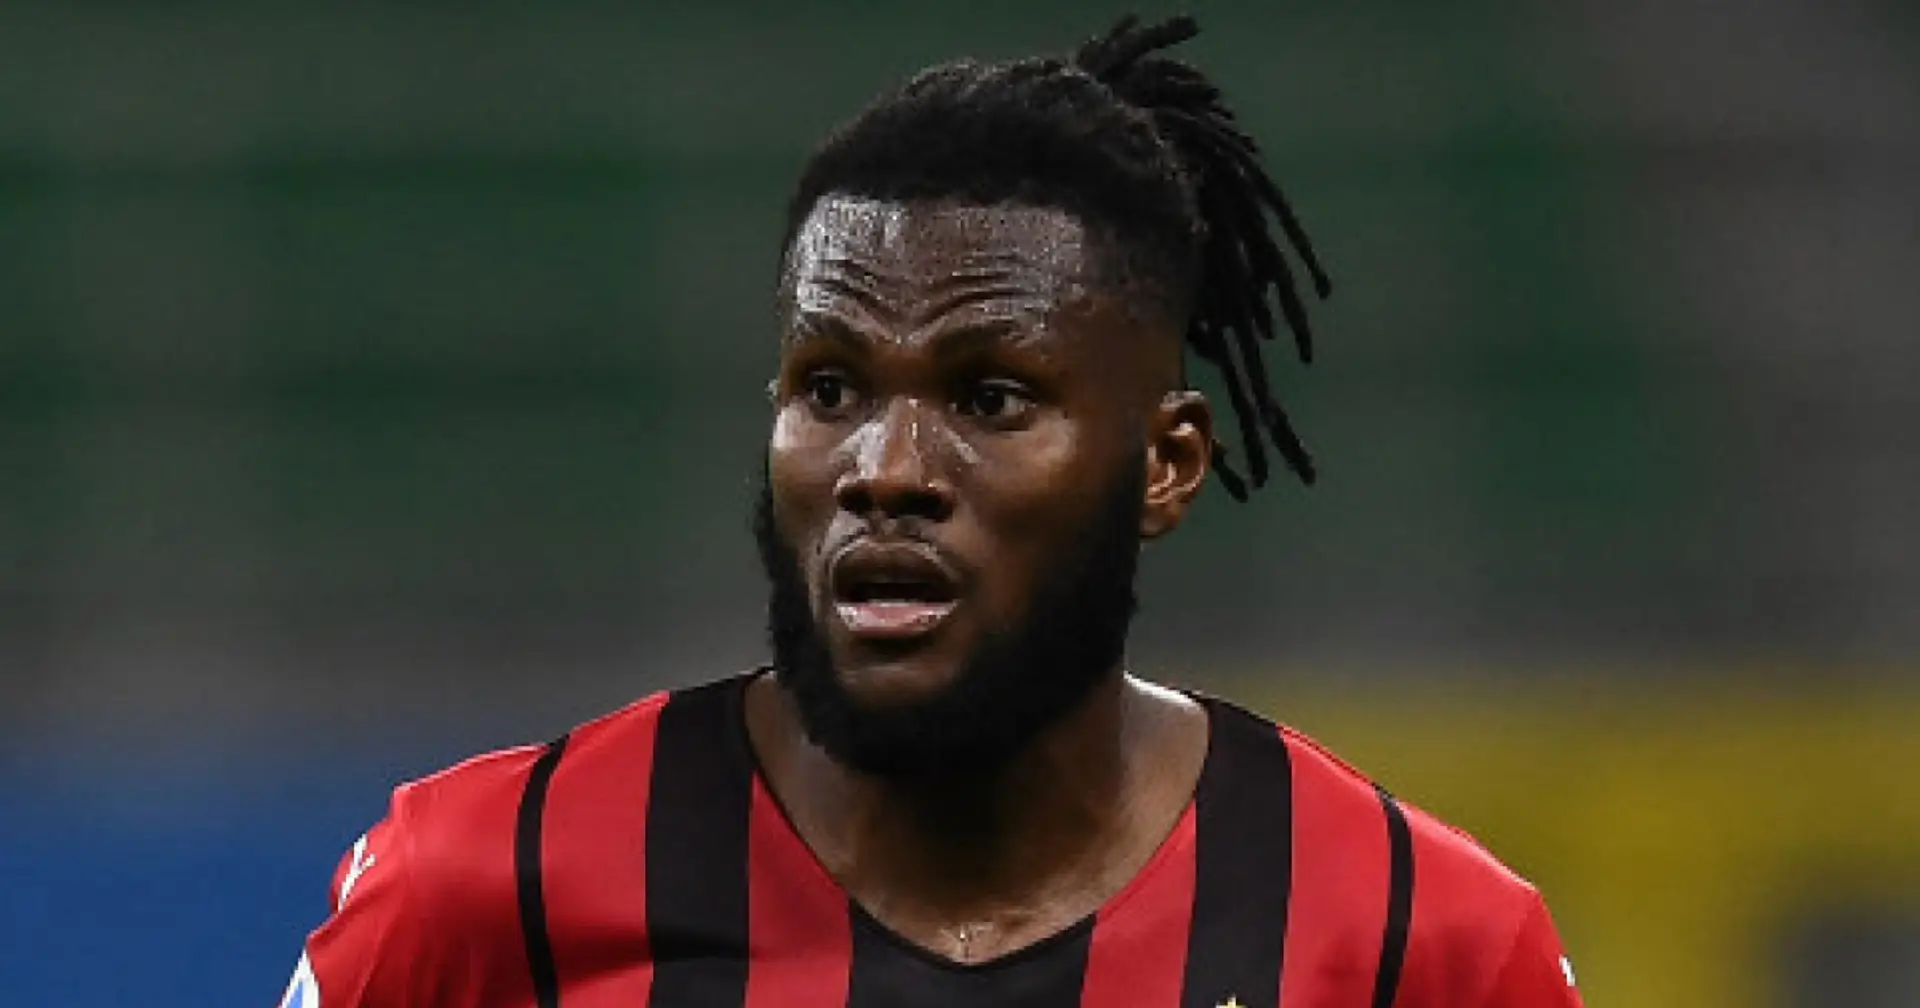 Kessie named Barca's 'main target' to reinforce midfield next summer (reliability: 5 stars)